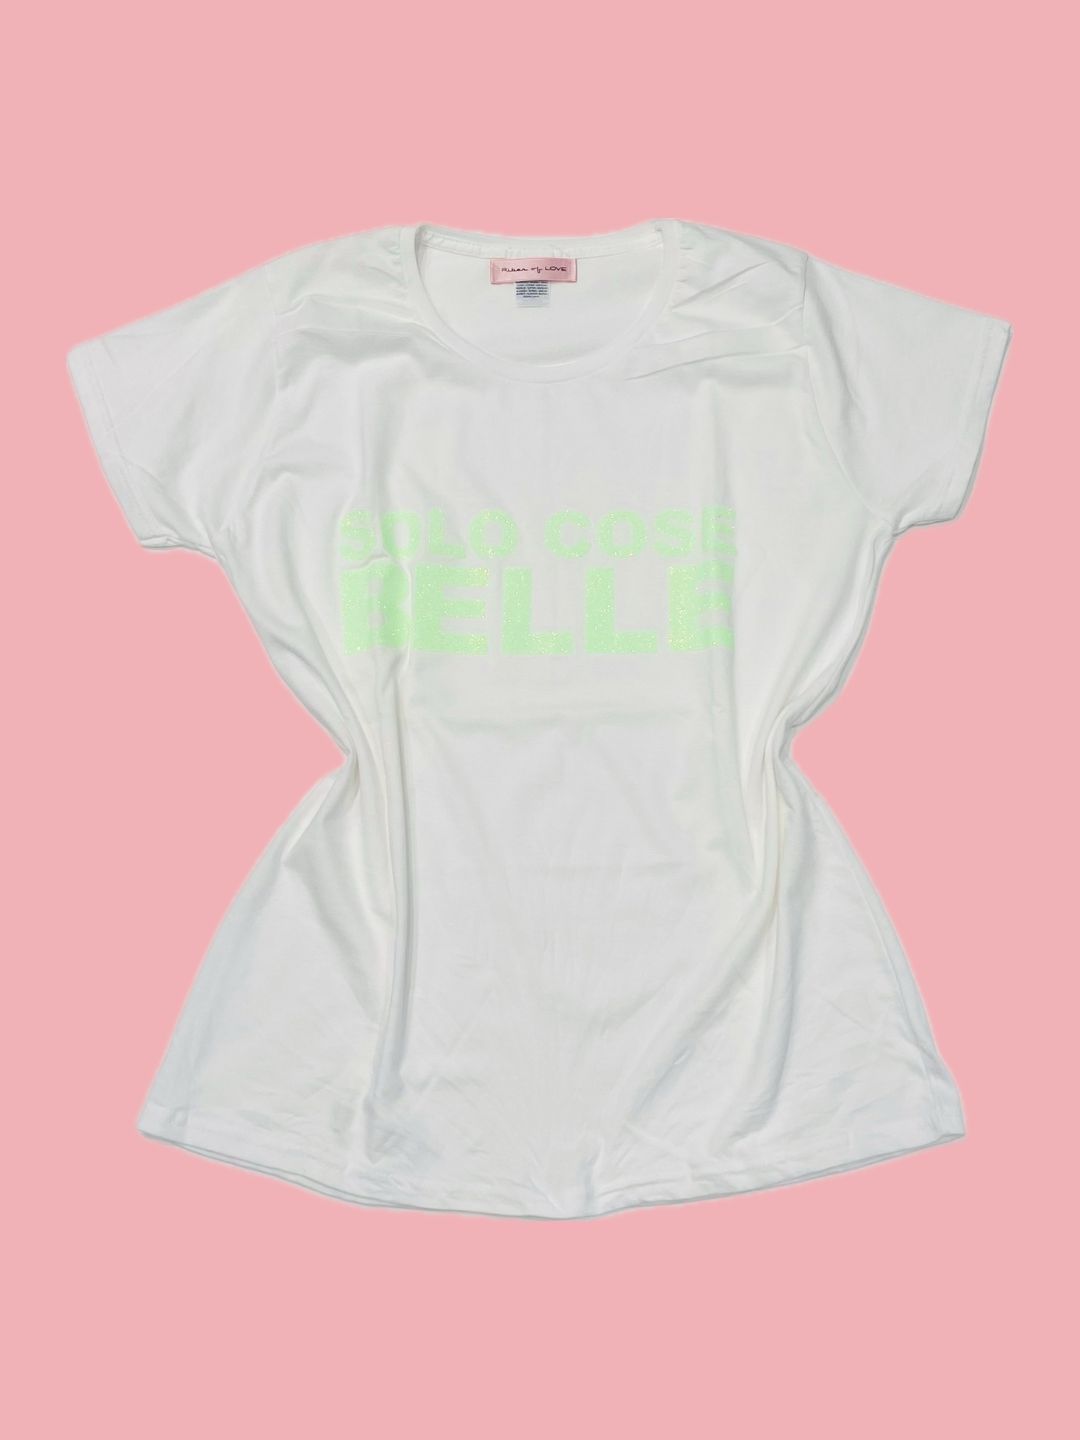 T-SHIRT SOLO COSE BELLE Ribes of LOVE